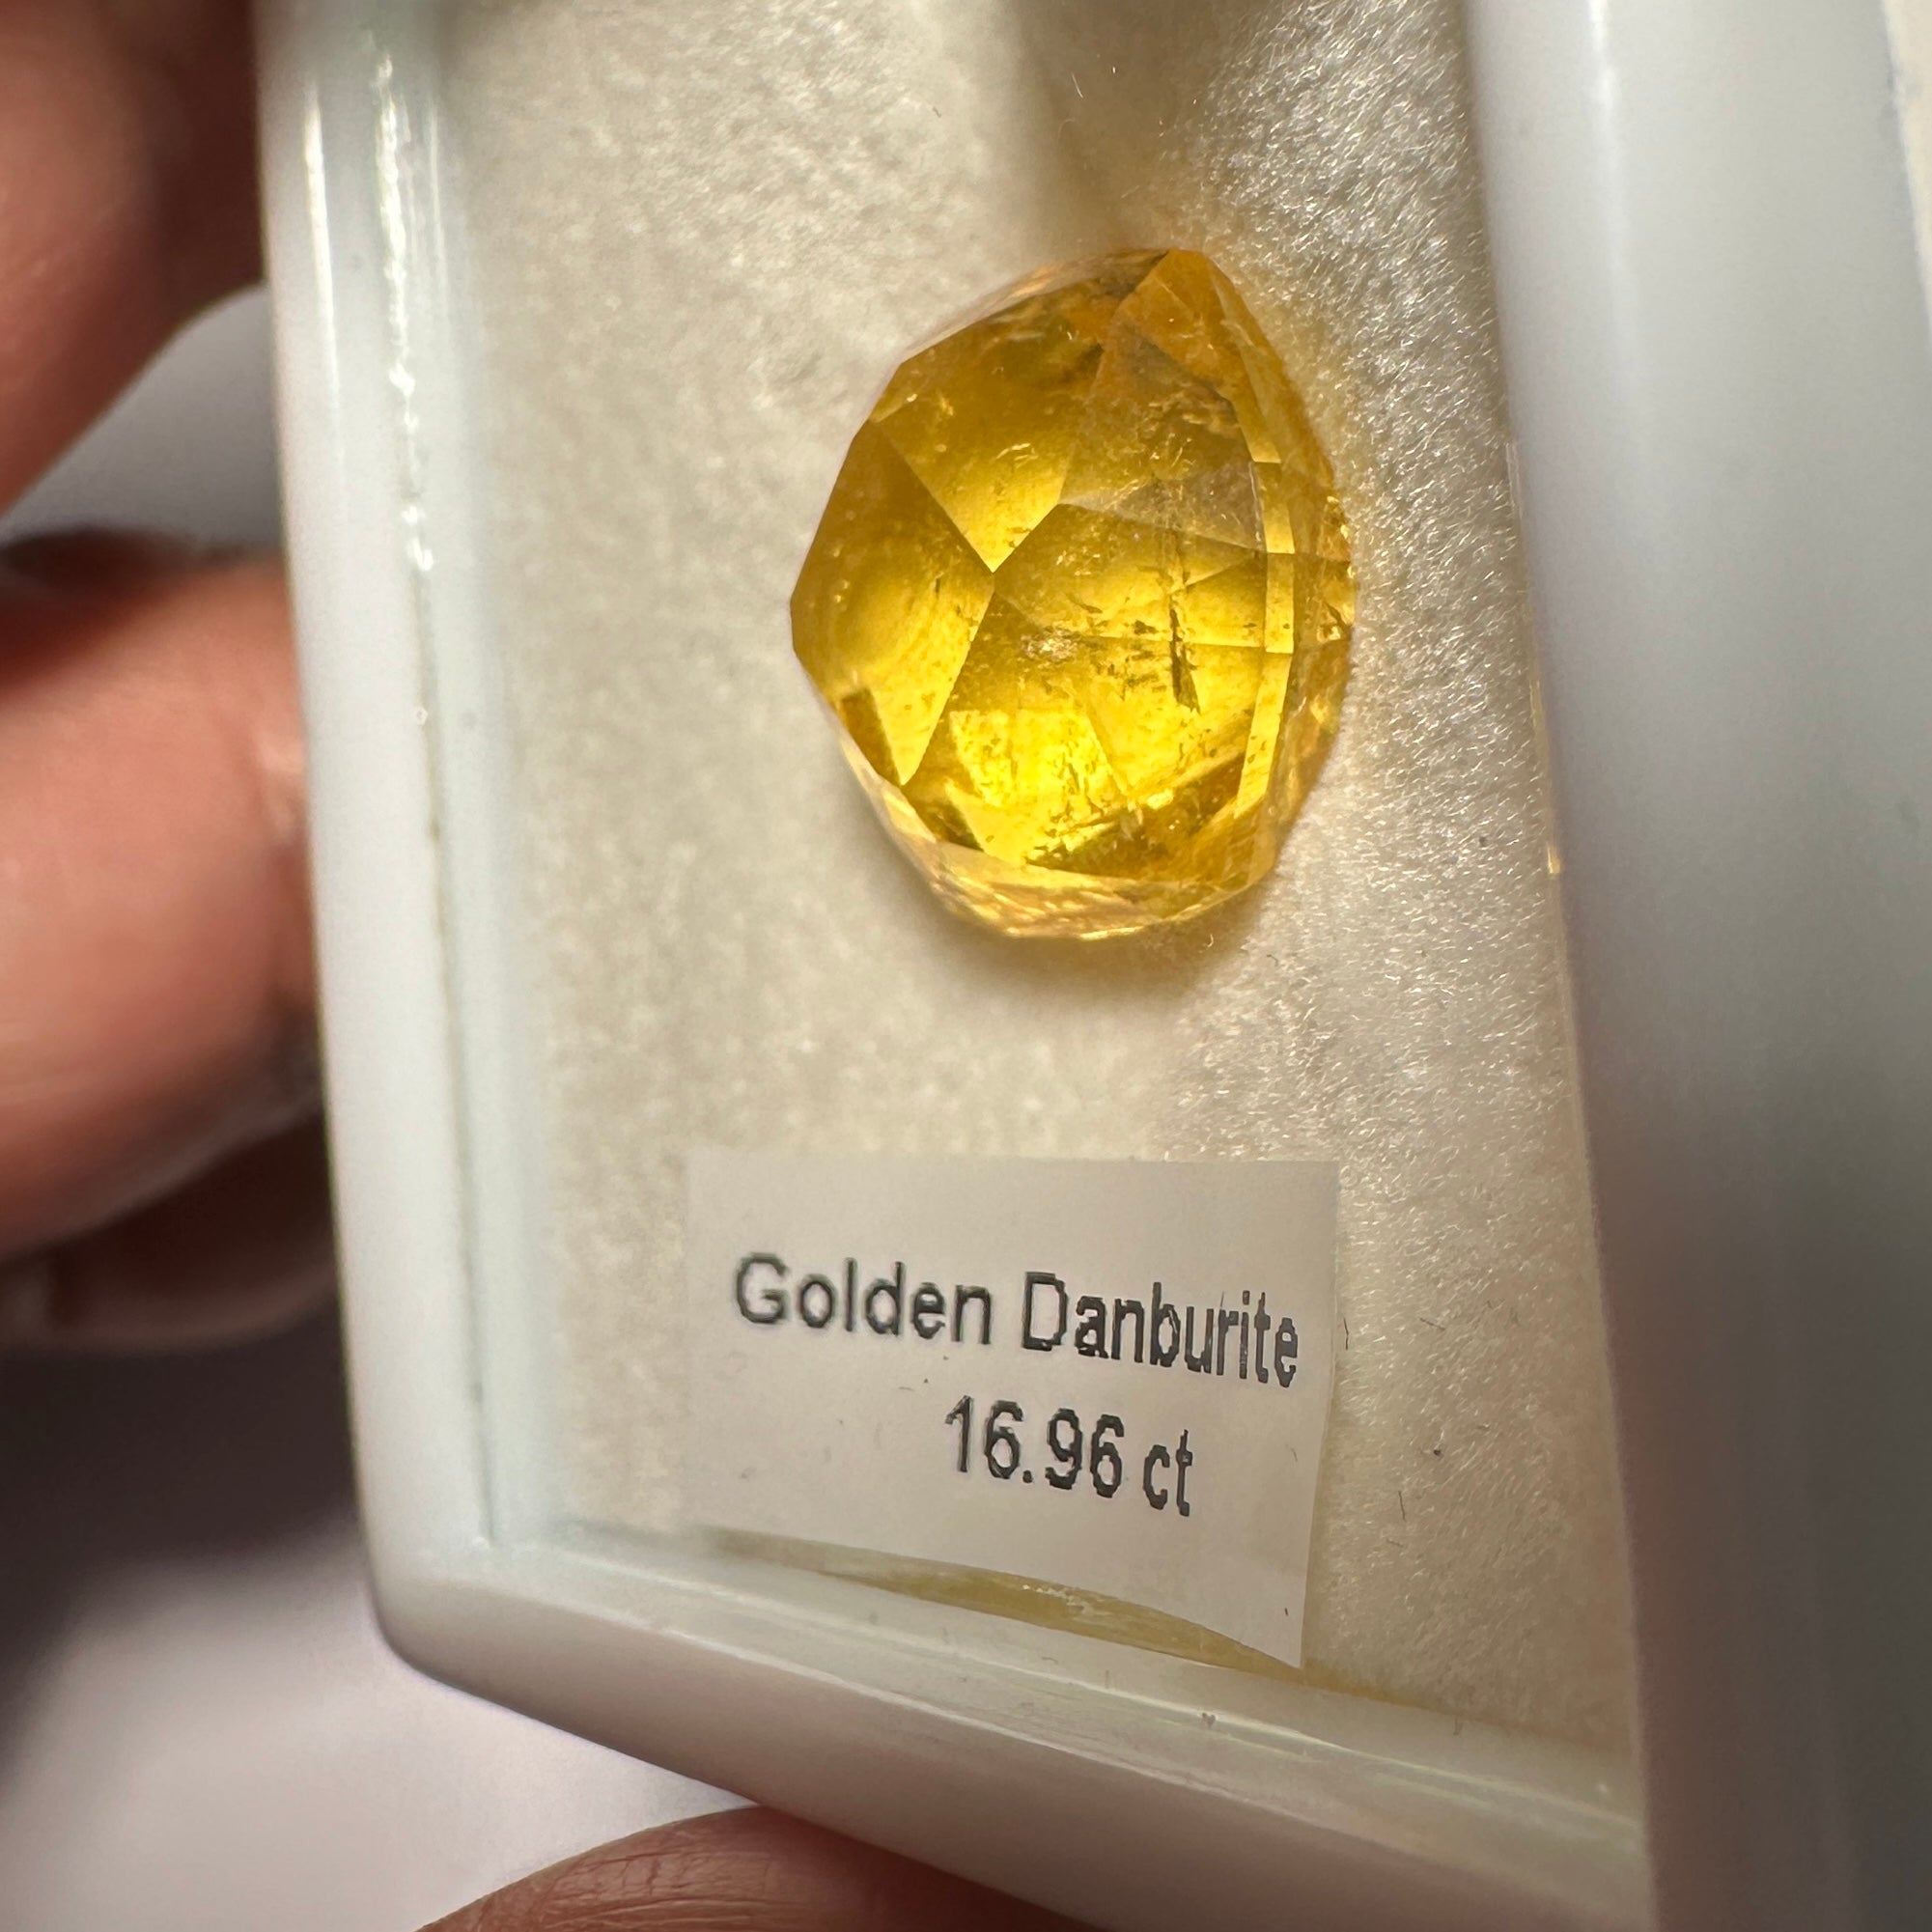 16.96ct Golden Danburite, Tanzania, Untreated Unheated. Precision Cut, Collectors Stone, Very Rare and Difficult To Get In This Size and Vibrancy